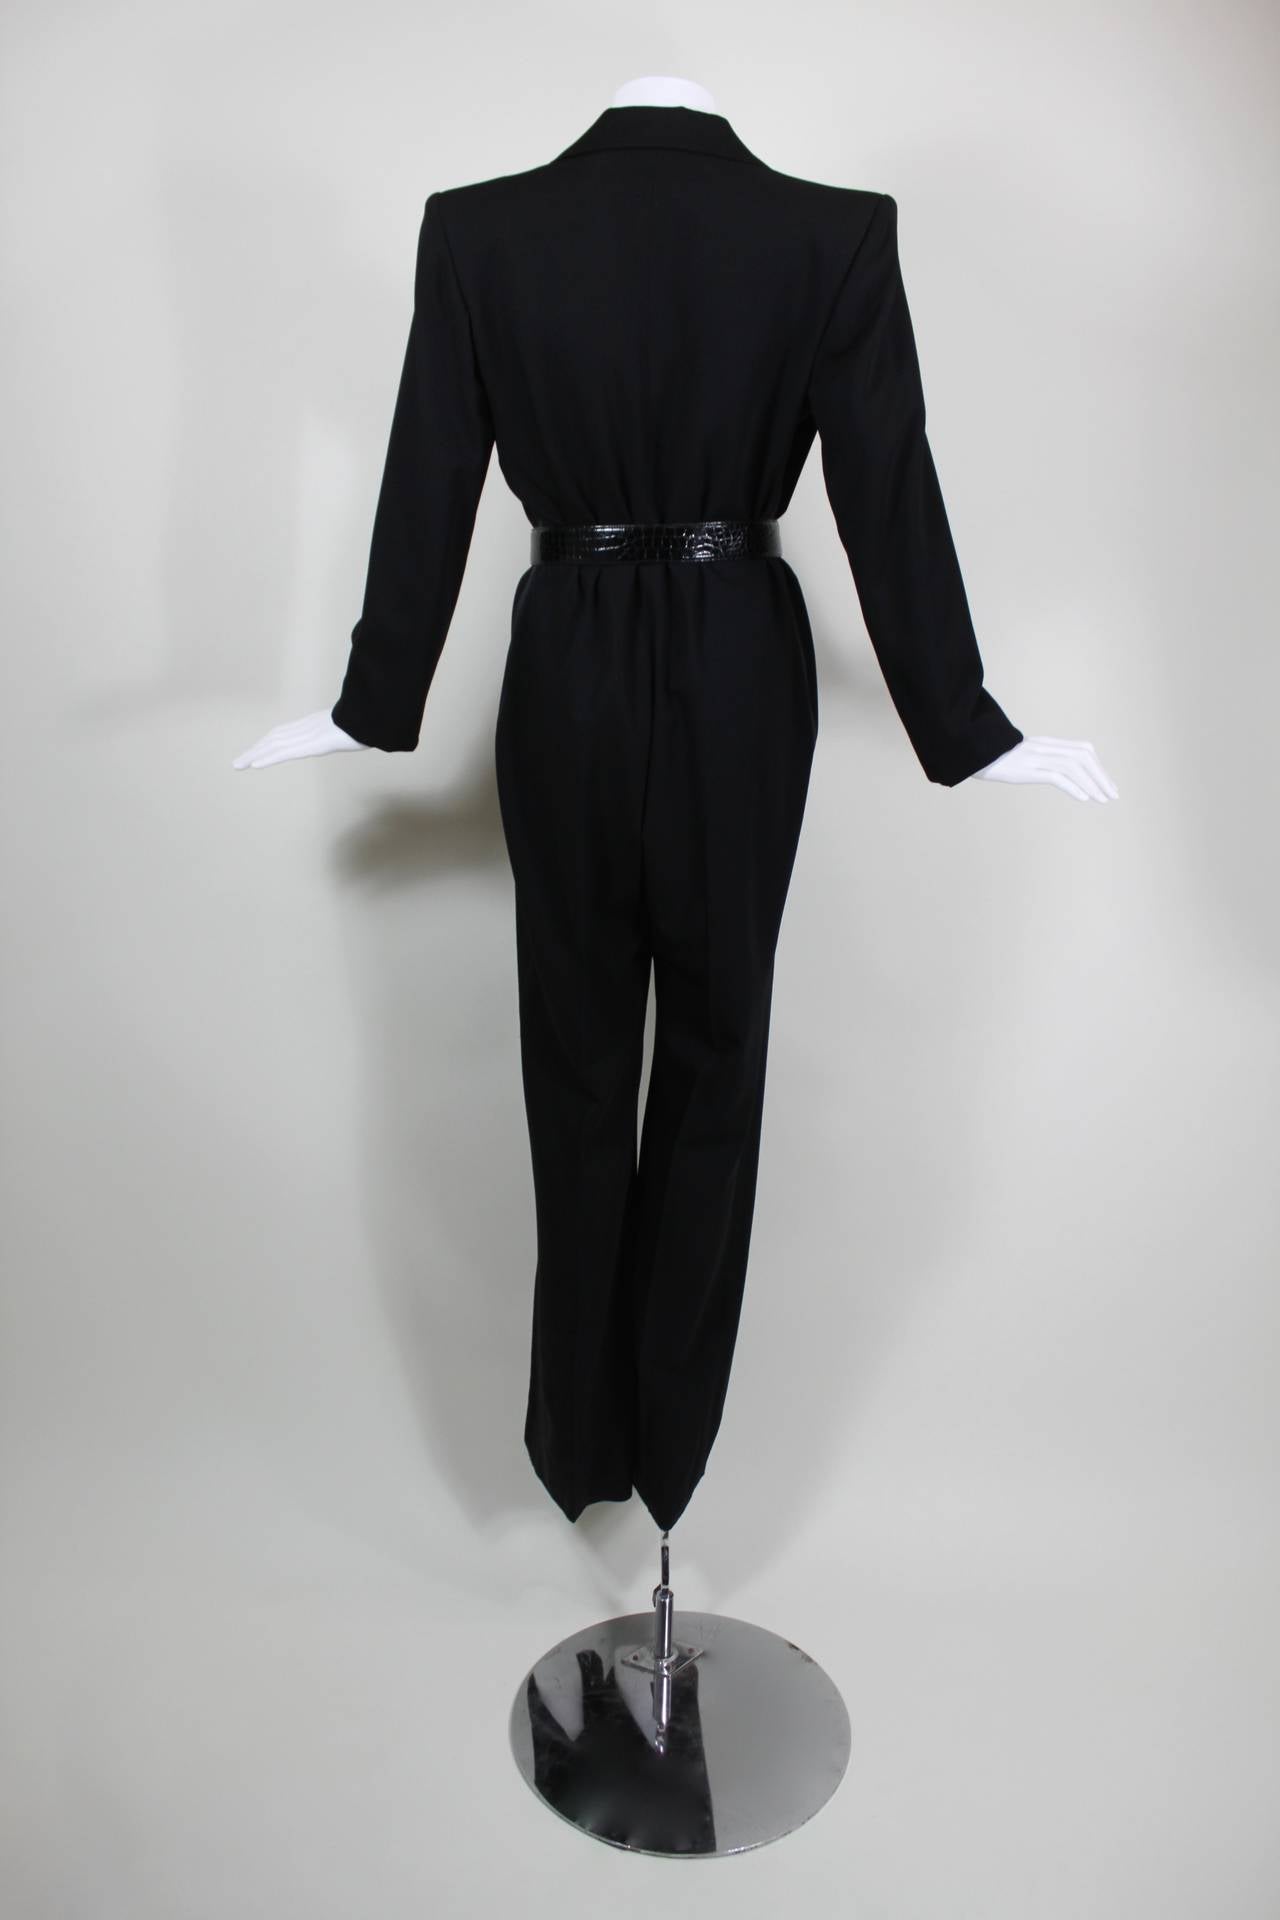 A classic wool gabardine tuxedo jumpsuit from Yves Saint Laurent. Features a deep-V tuxedo cut with satin lapels. Jumpsuit buttons in front. Fully lined.

Measurements--
Bust: 38 inches
Waist: 32 inches
Hip: up to 40 inches
Inseam: 34